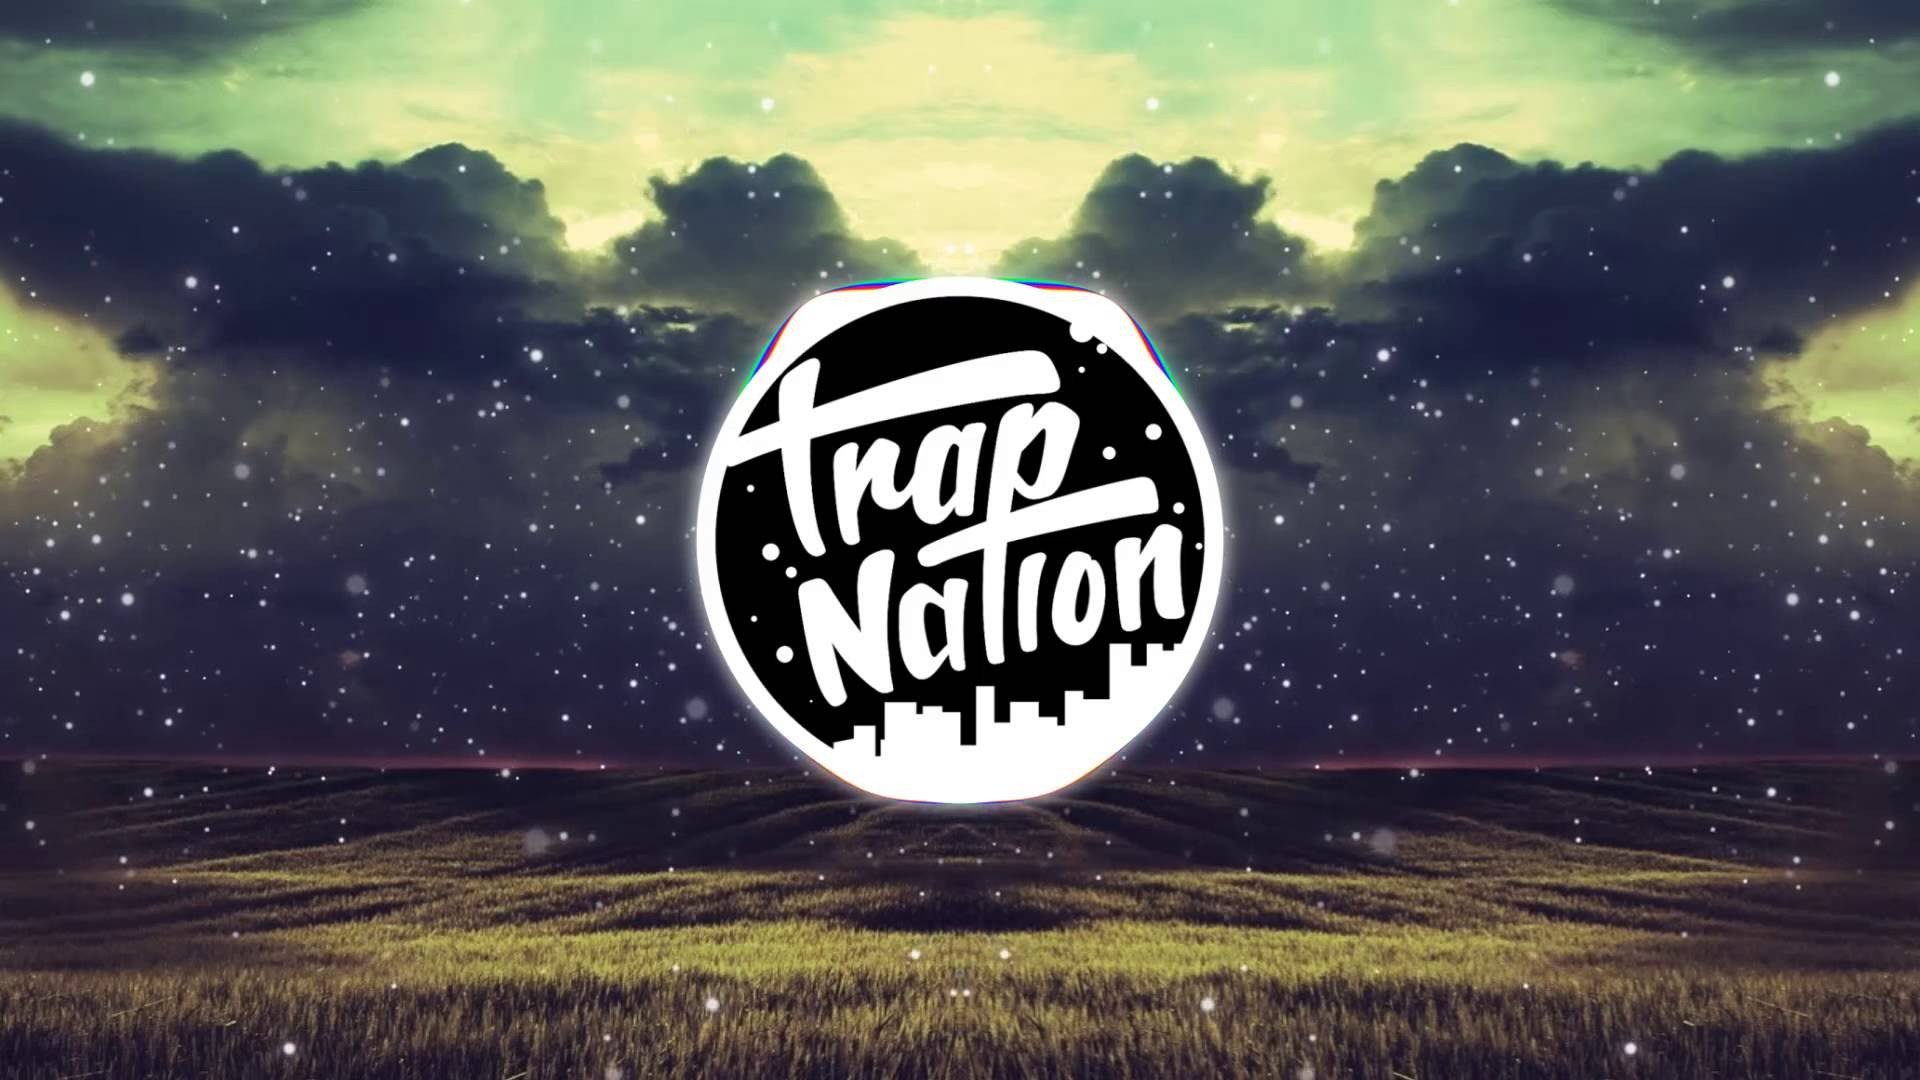 Trap Music, Trap Nation Wallpapers HD / Desktop and Mobile ...